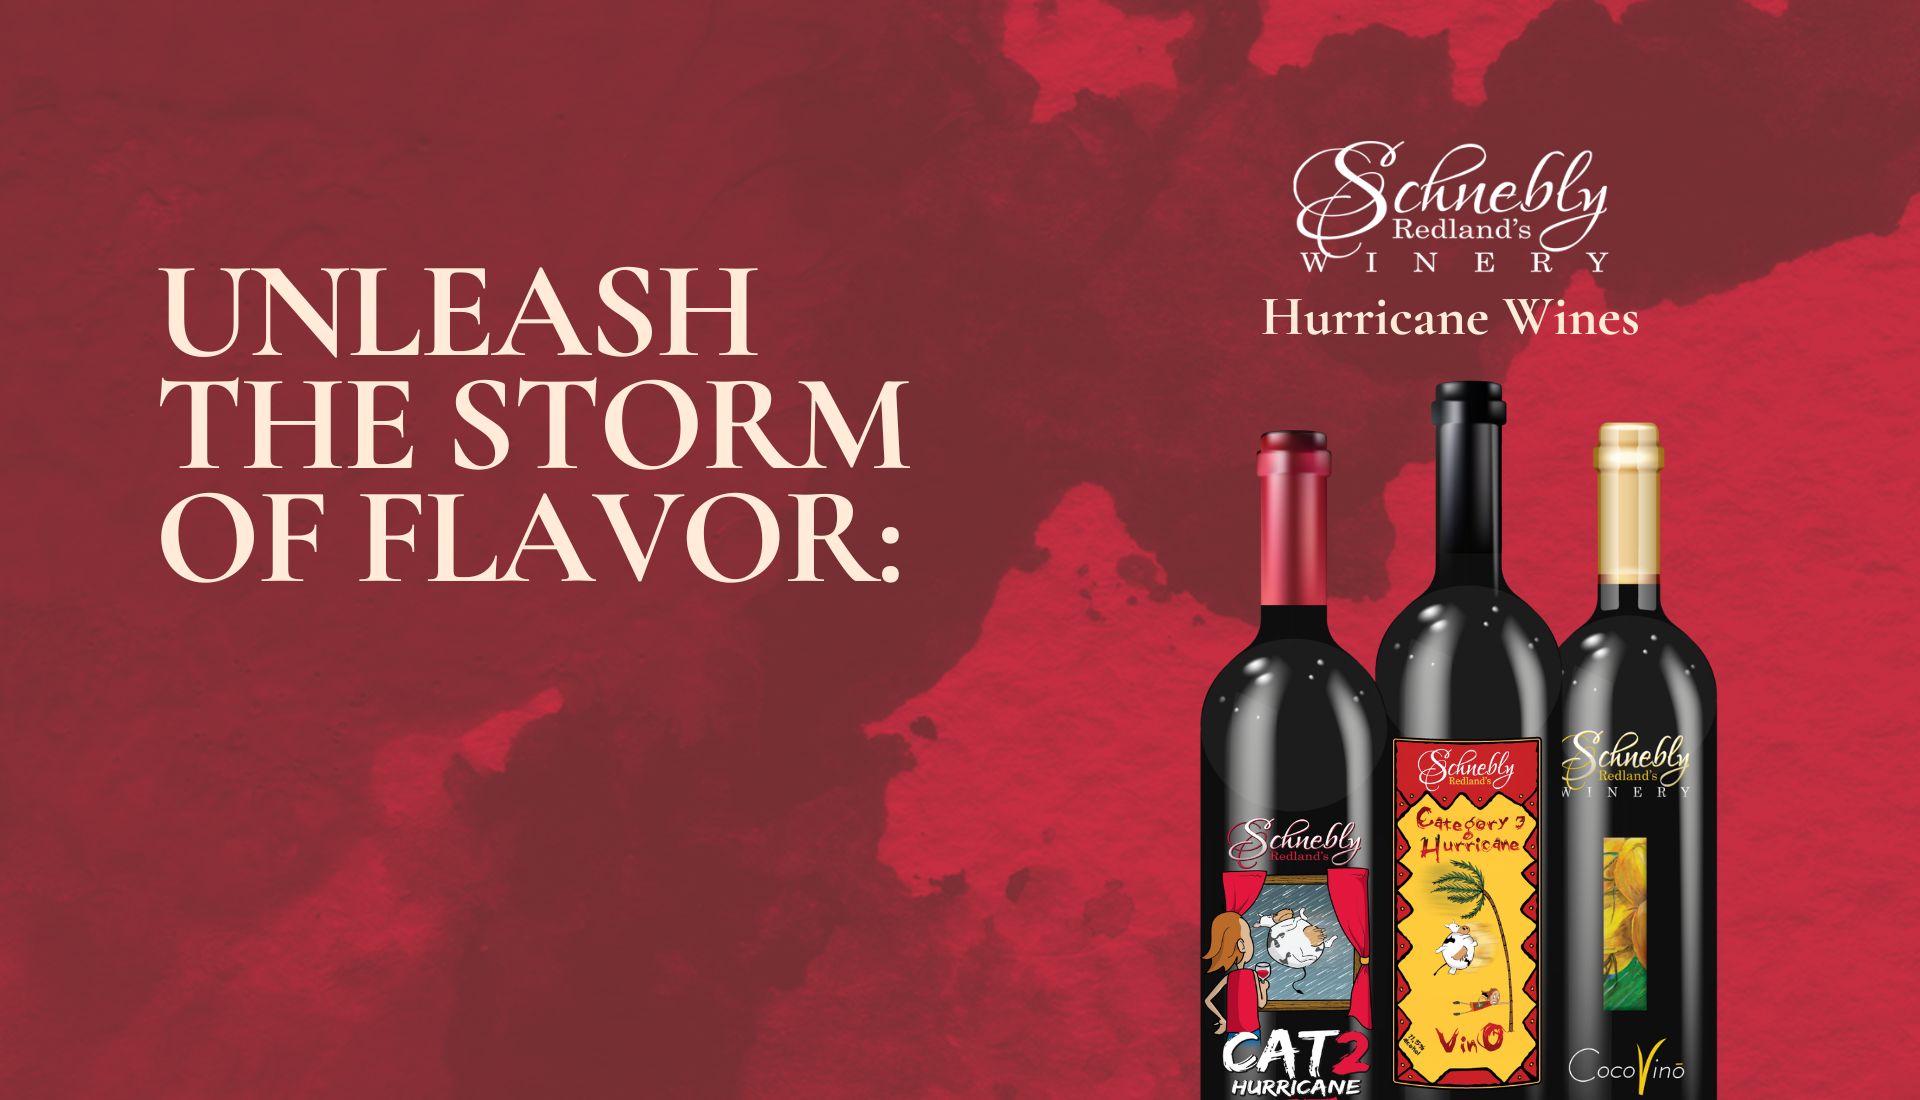 Unleash the Storm of Flavor: Schnebly Winery's Hurricane Wines